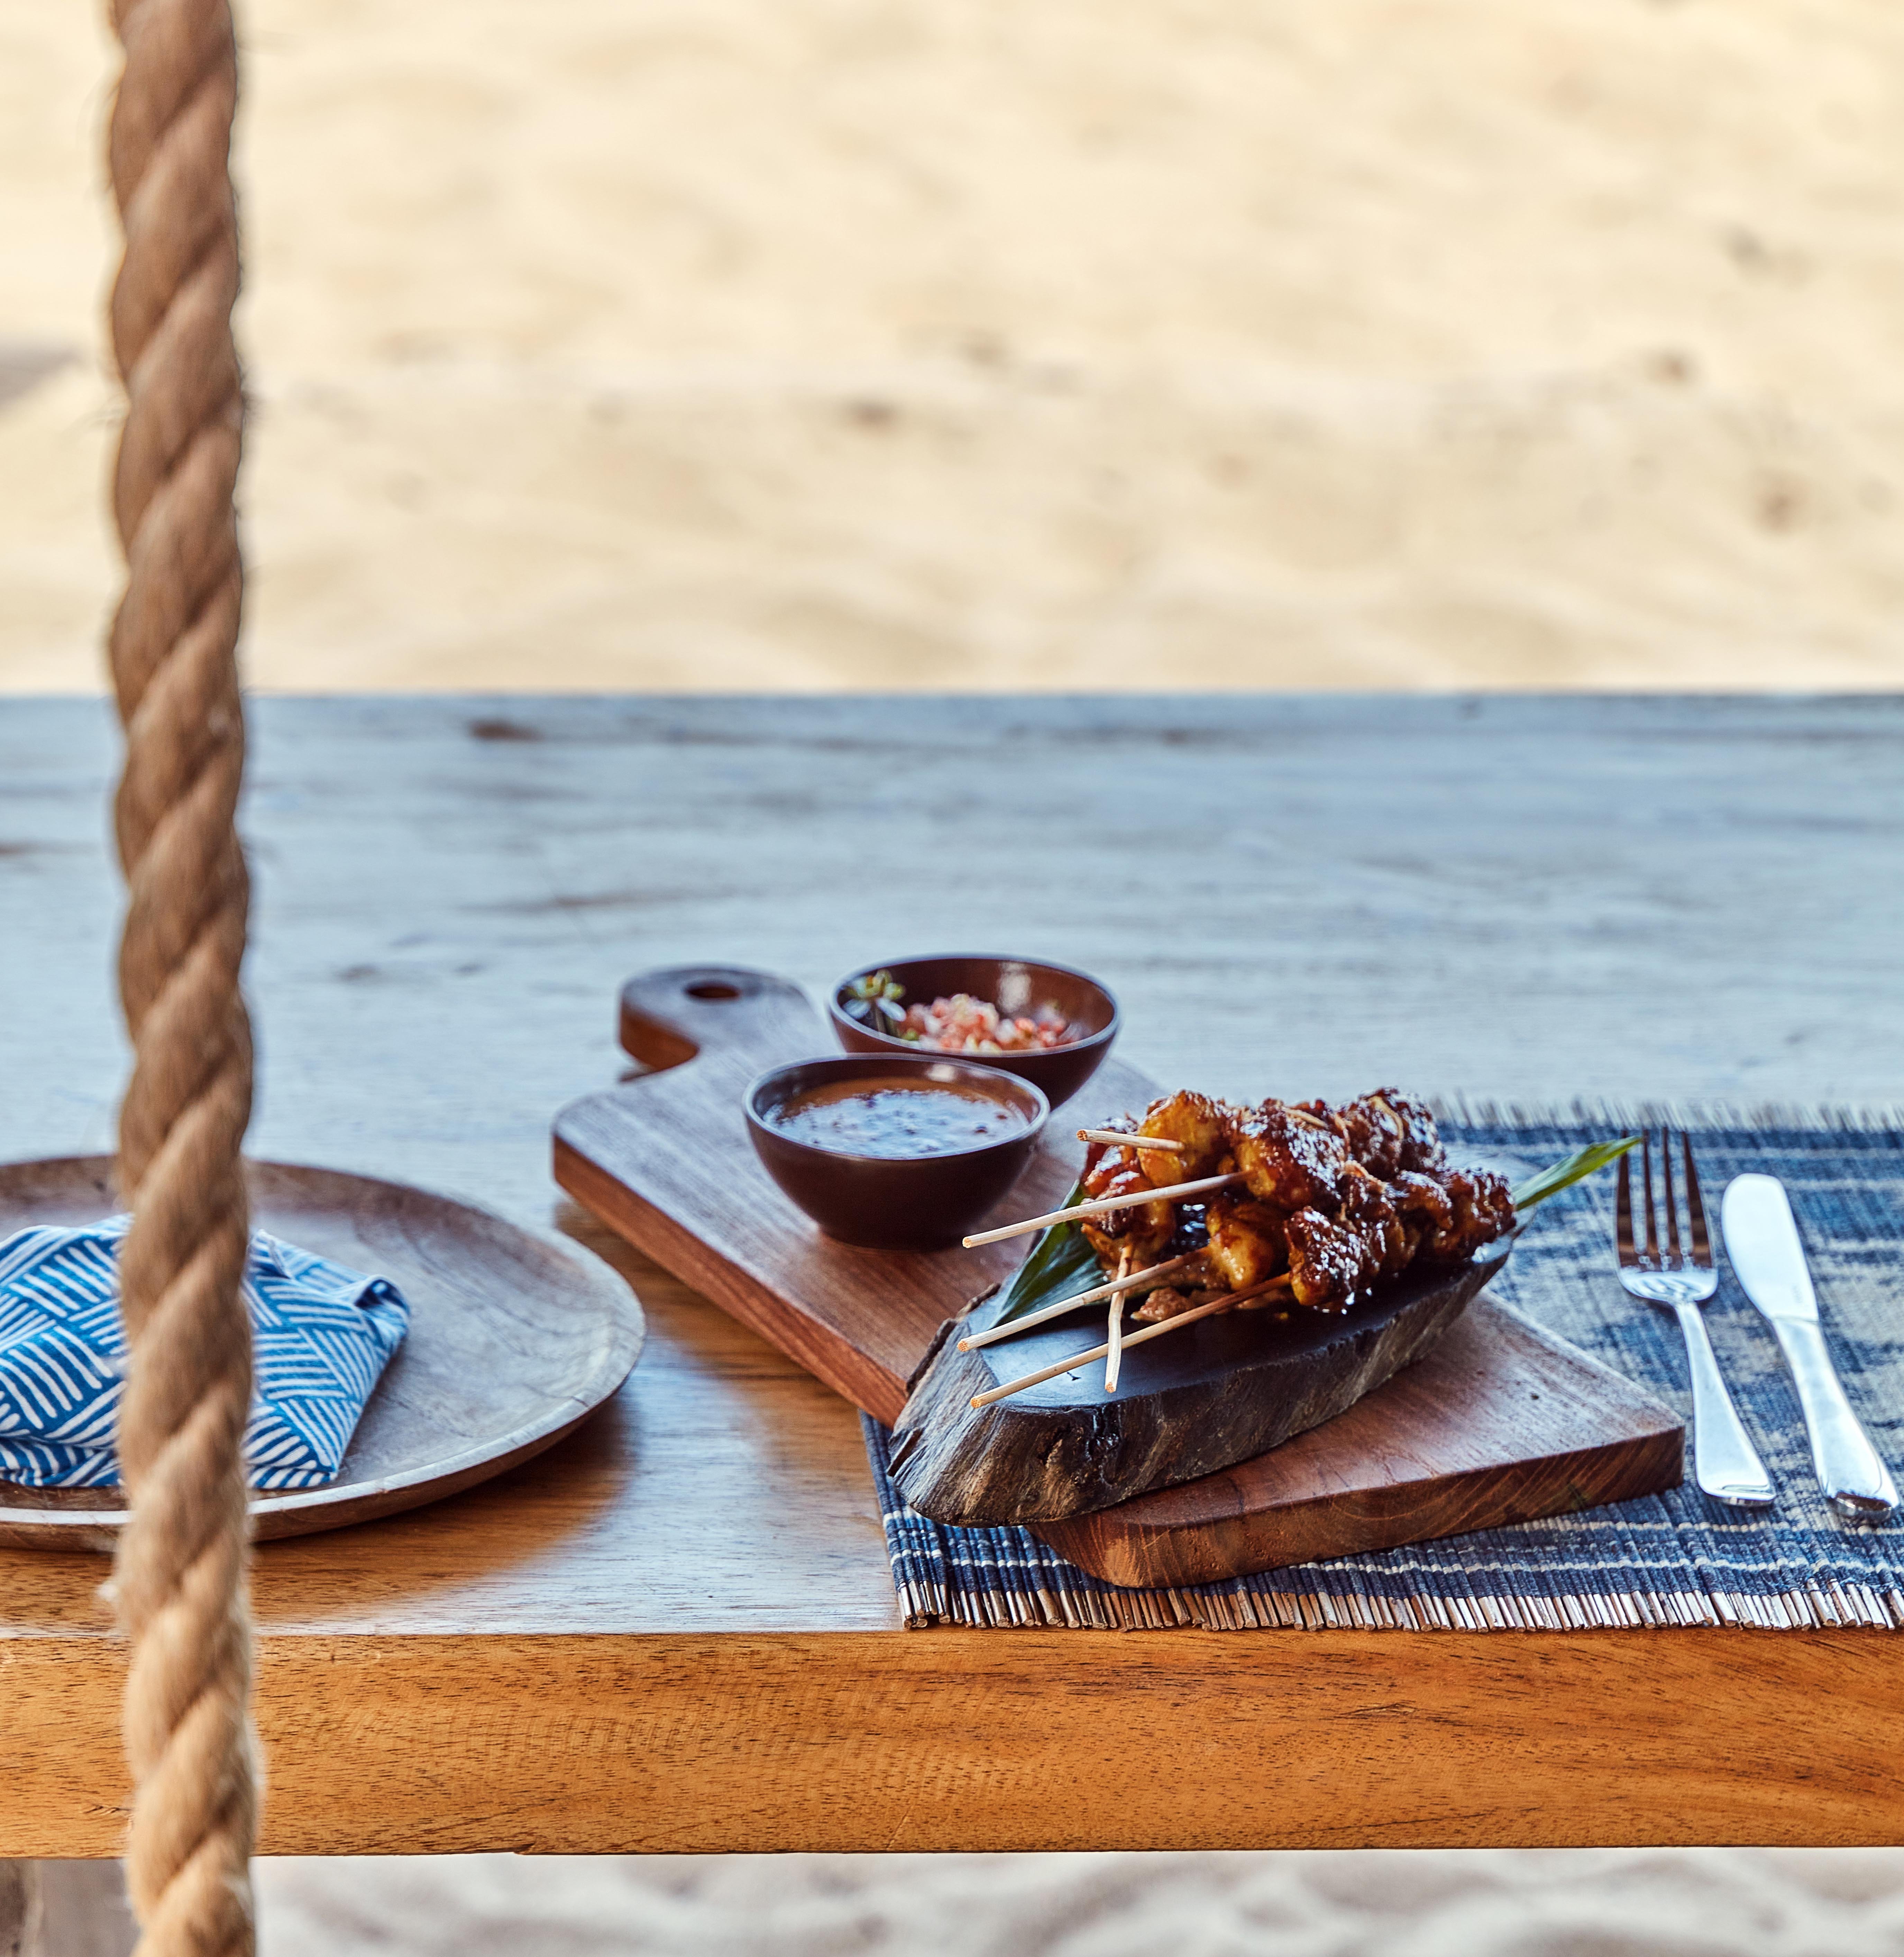 grilled_satay_with_peanut_sauce_served_on_wooden_serving_board_rope_swing_table_boat_house (1) (1)